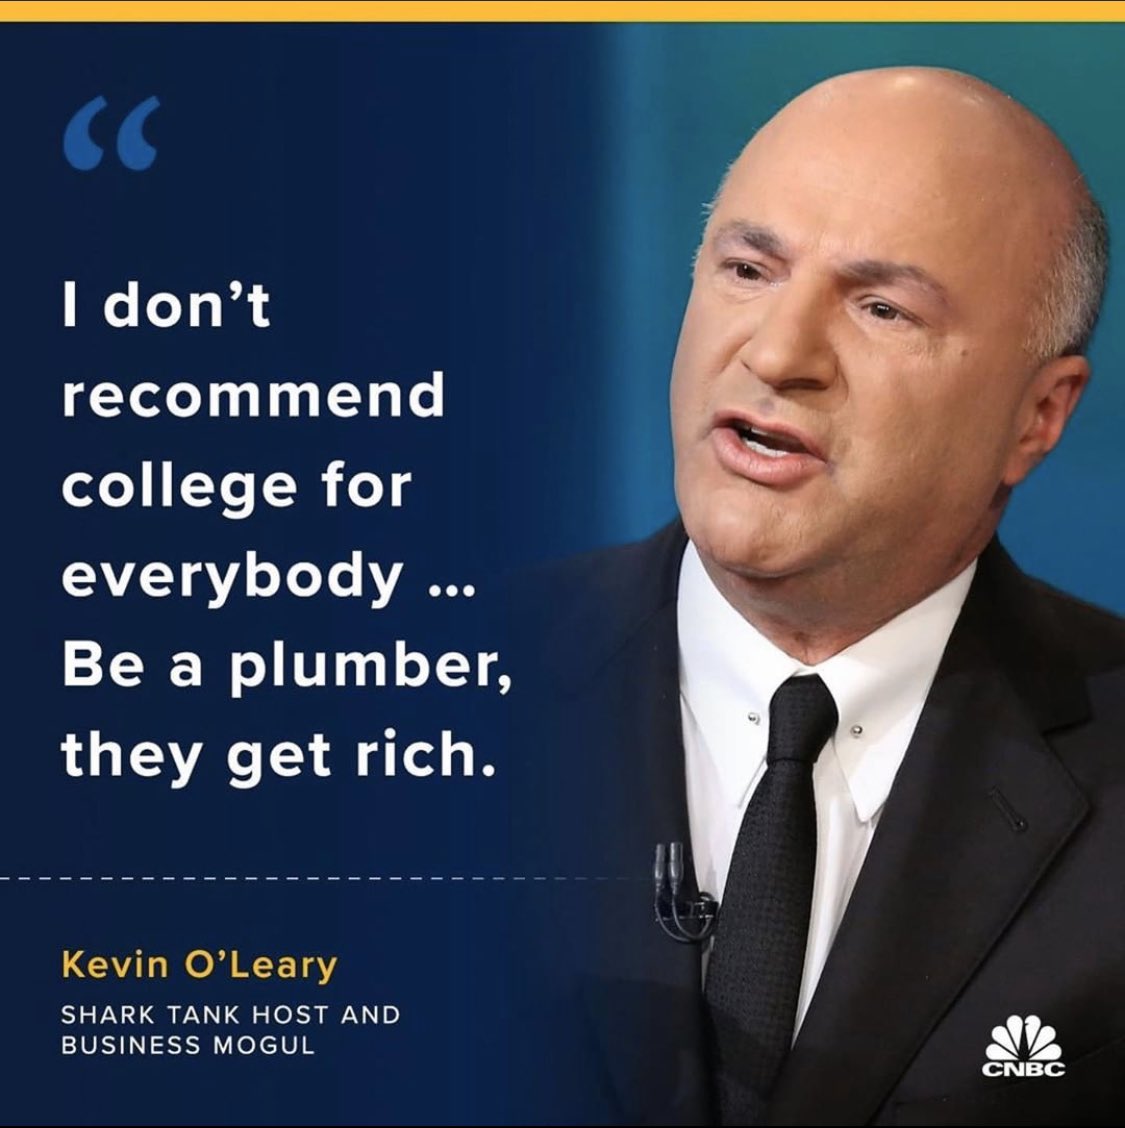 “I don’t recommend college for everybody. The fact is there’s a lot of trade schools that would help you make a lot more money. Be a plumber, they get rich. Everybody has to have a plumber, even in a recession.” - @kevinolearytv #iowaskilledtrades #keepcraftalive #apprenticeship